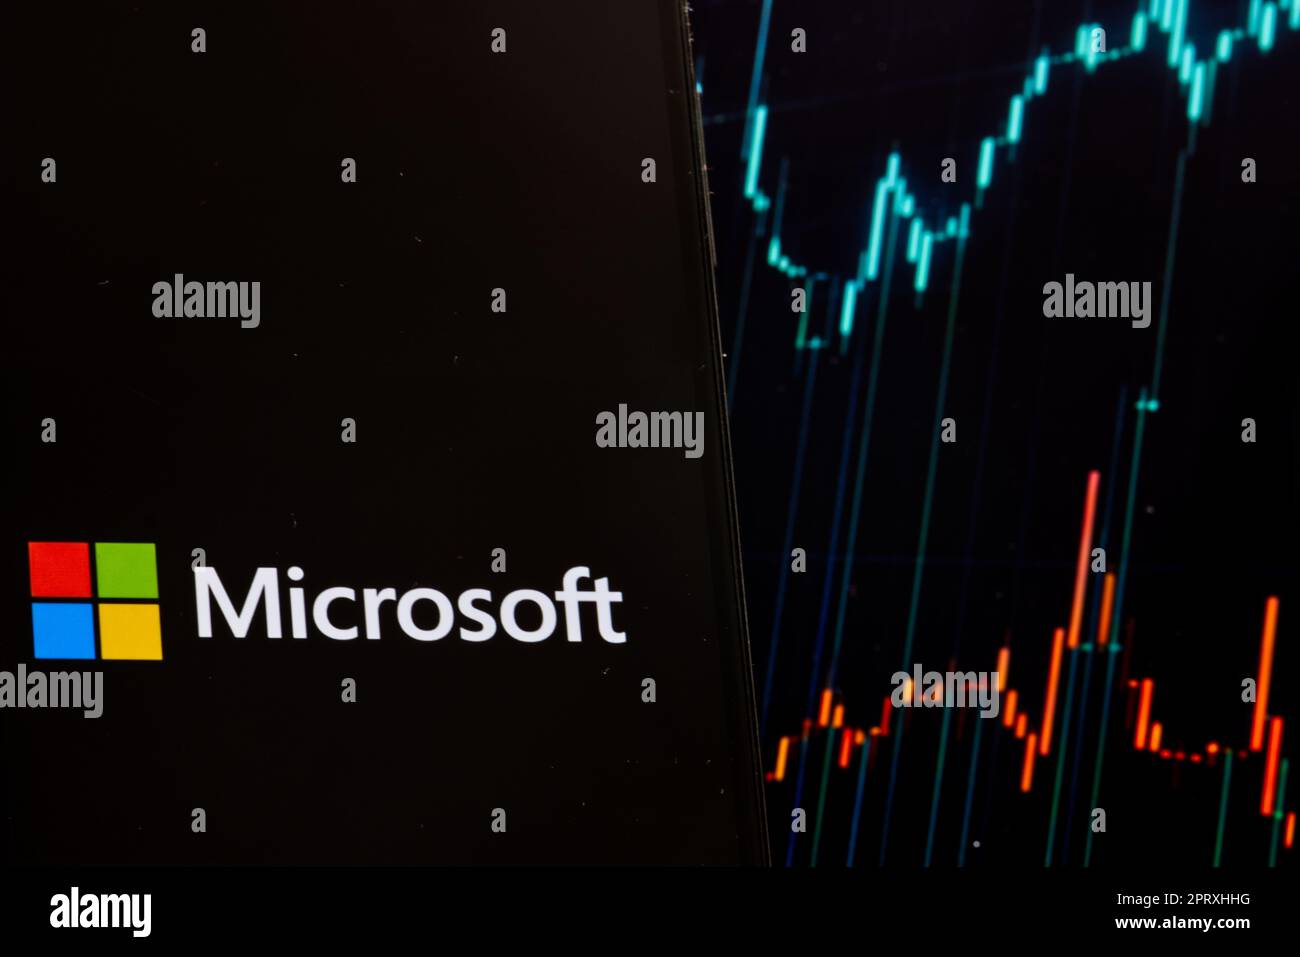 Microsoft stock price on the trading market with chart on the company logo displayed on smartphone. Stock Photo